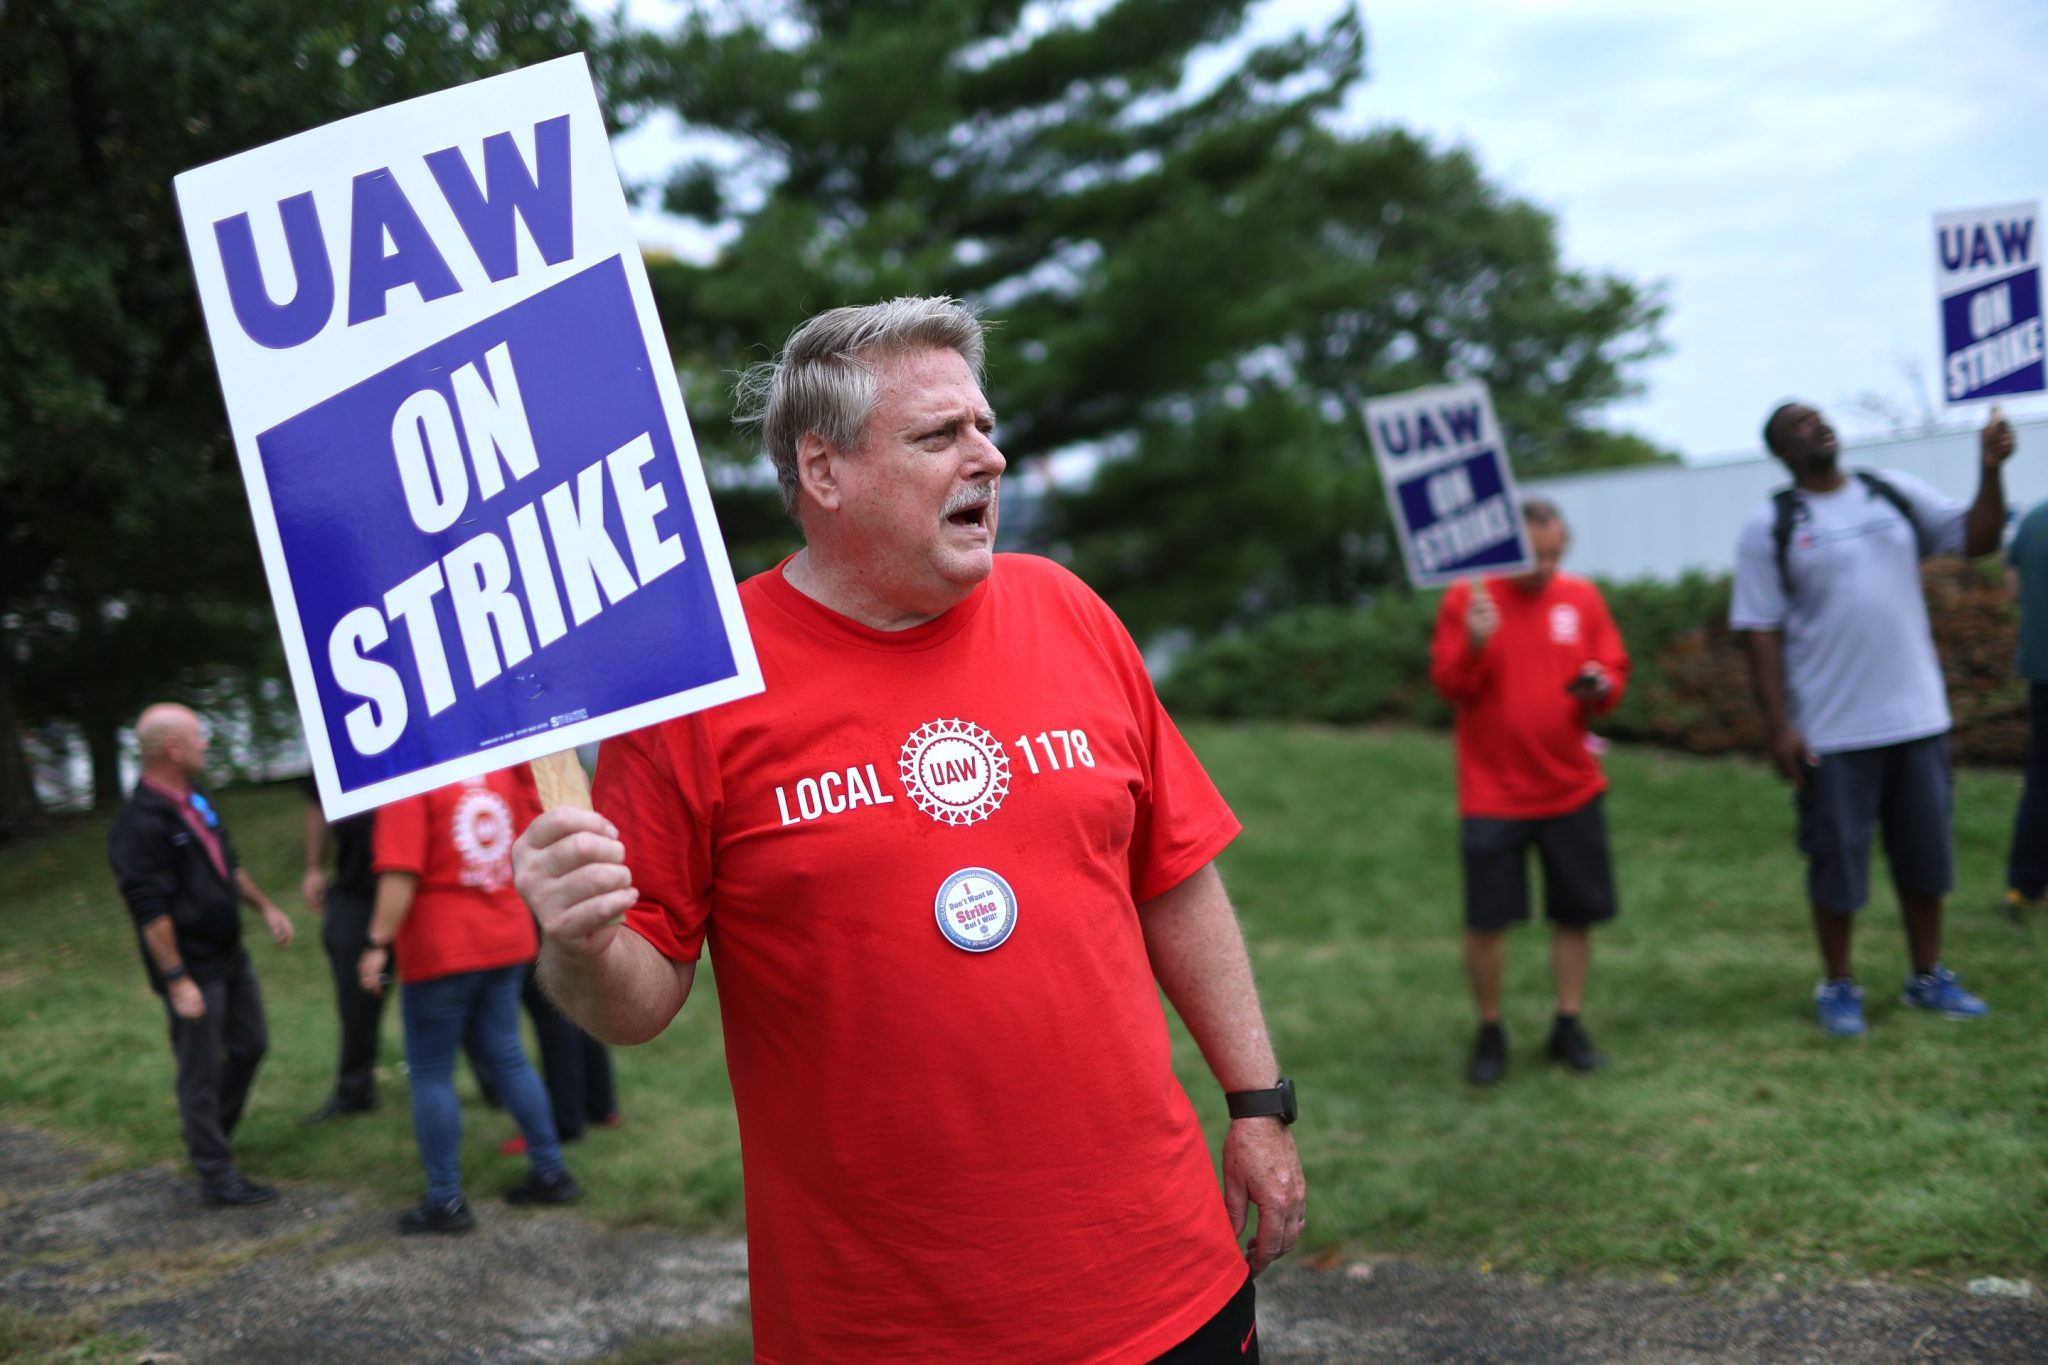 6 critical things to know about the autoworkers strike that threatens to reshape the economy, politics, and labor’s future